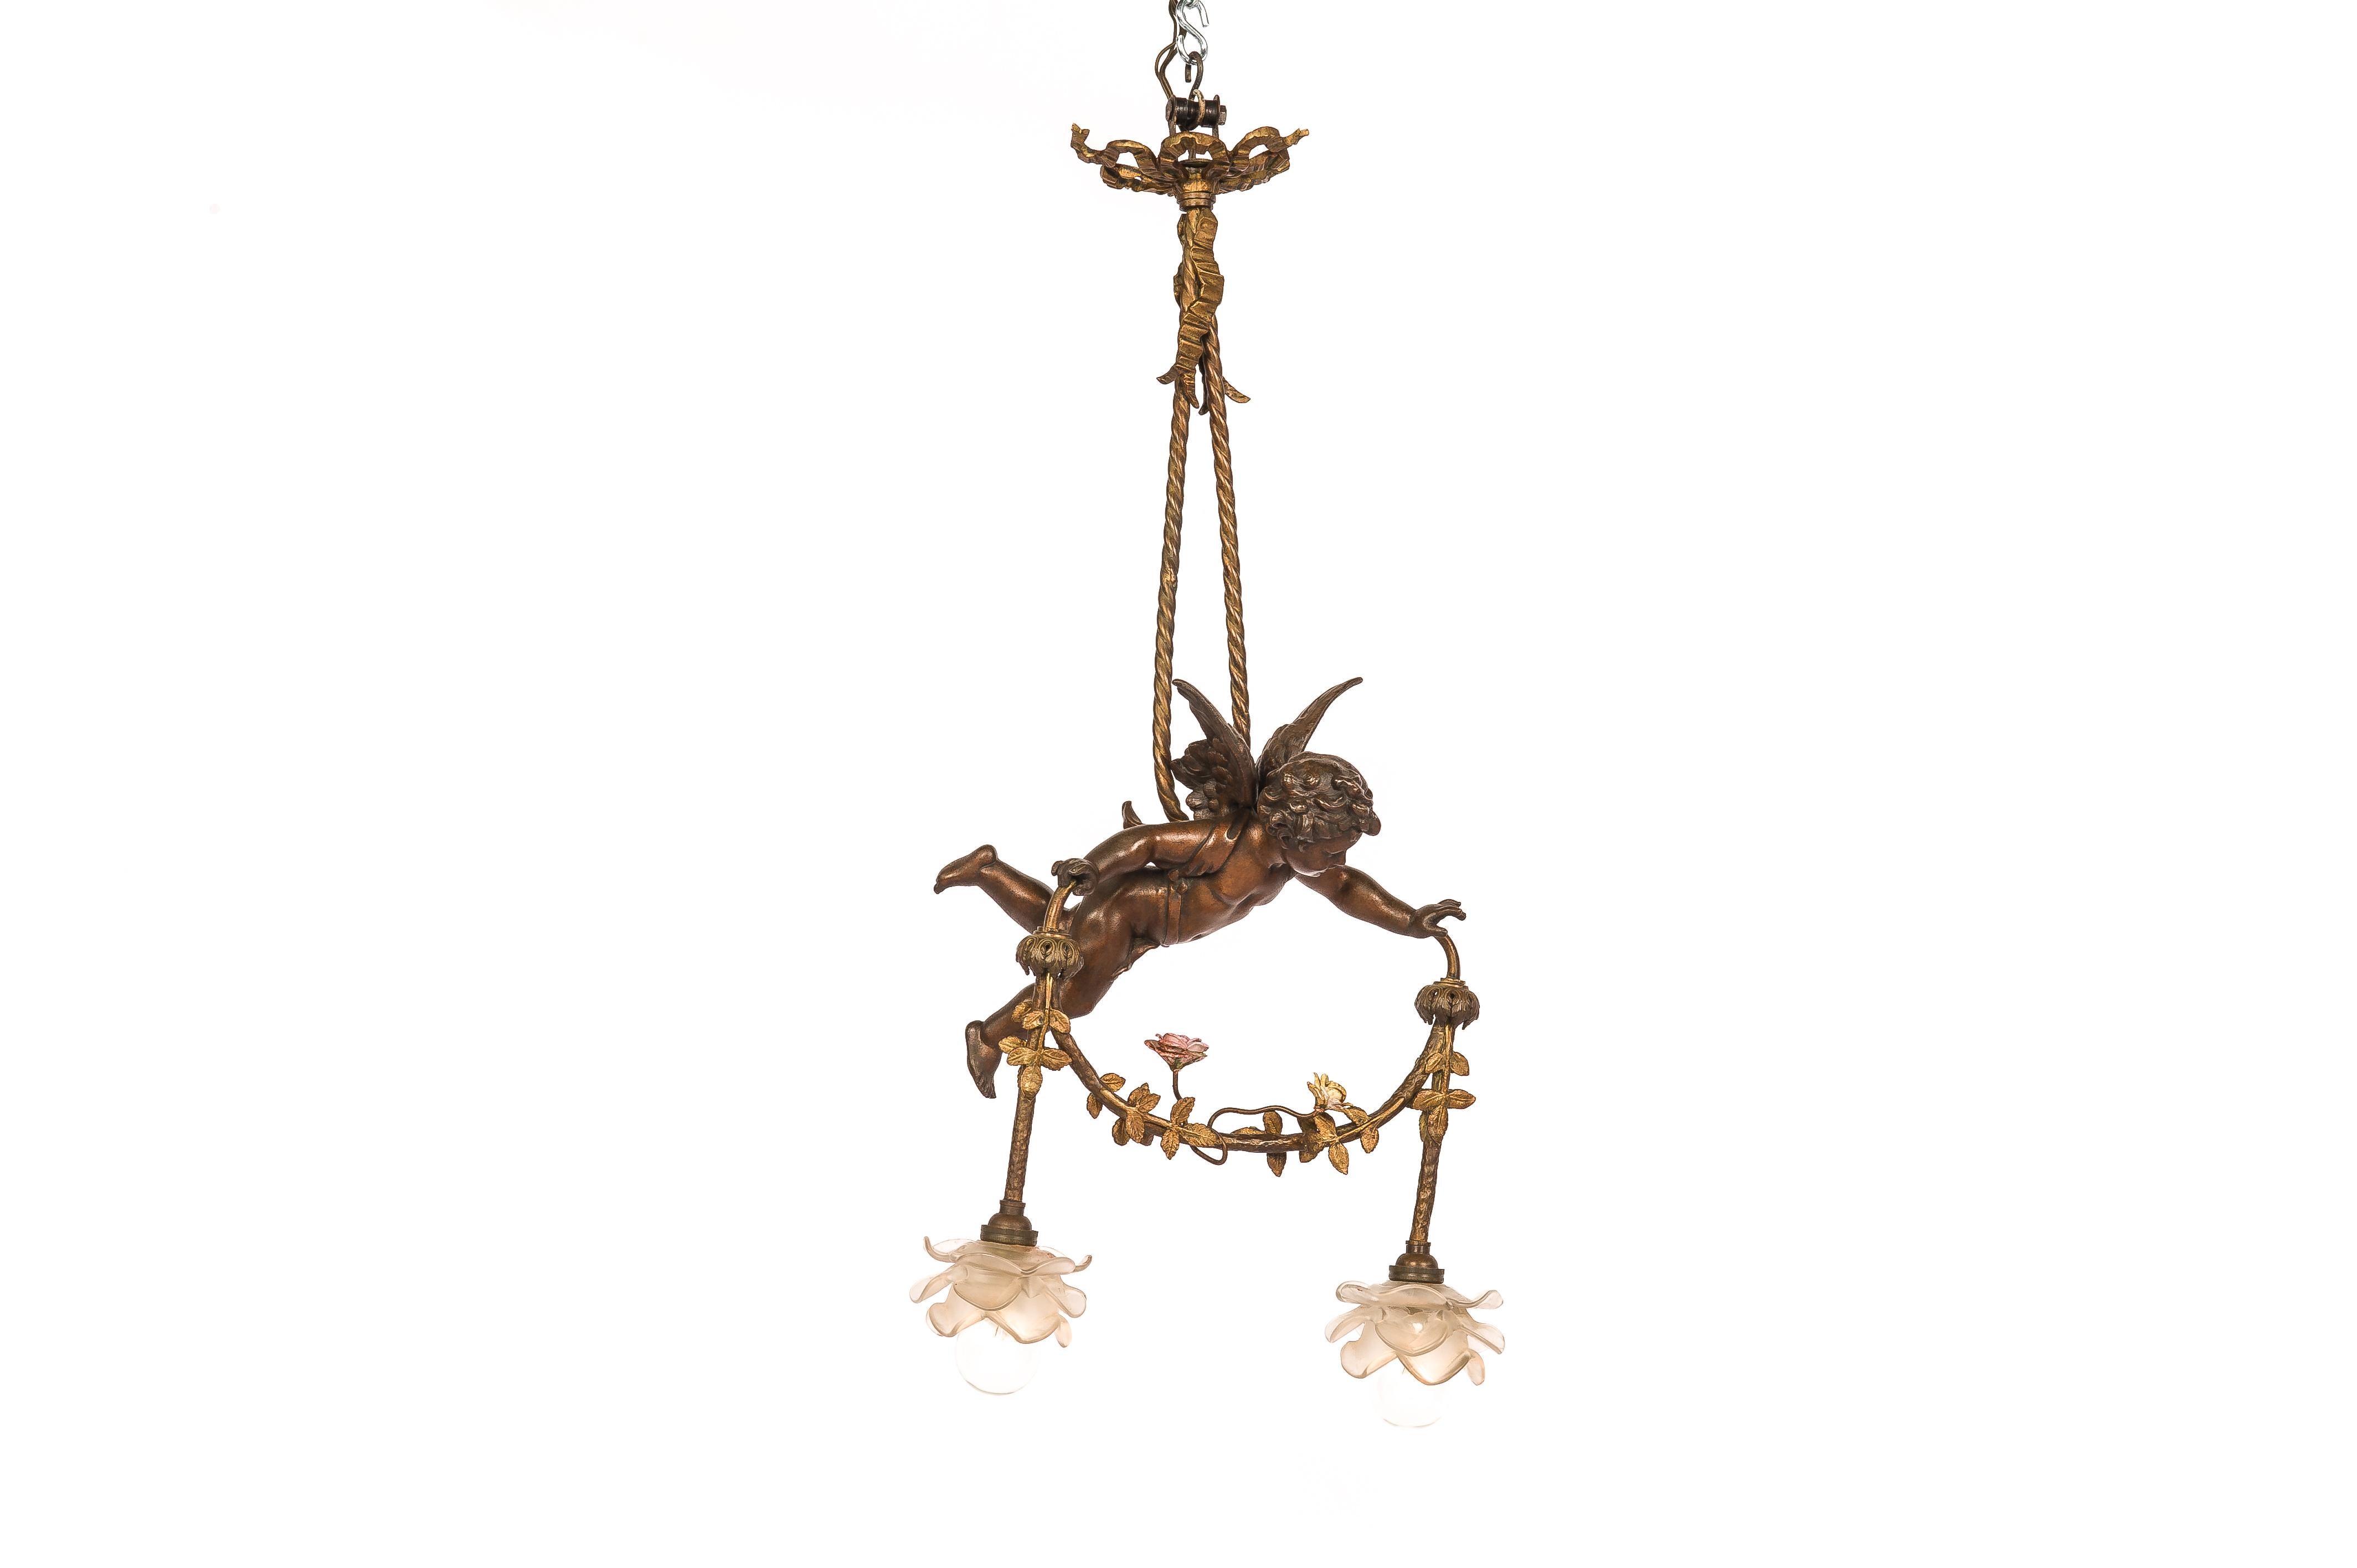 Bronze Antique 19th-Century French Brass Angel or Putti Pendant Light with Floral Garla